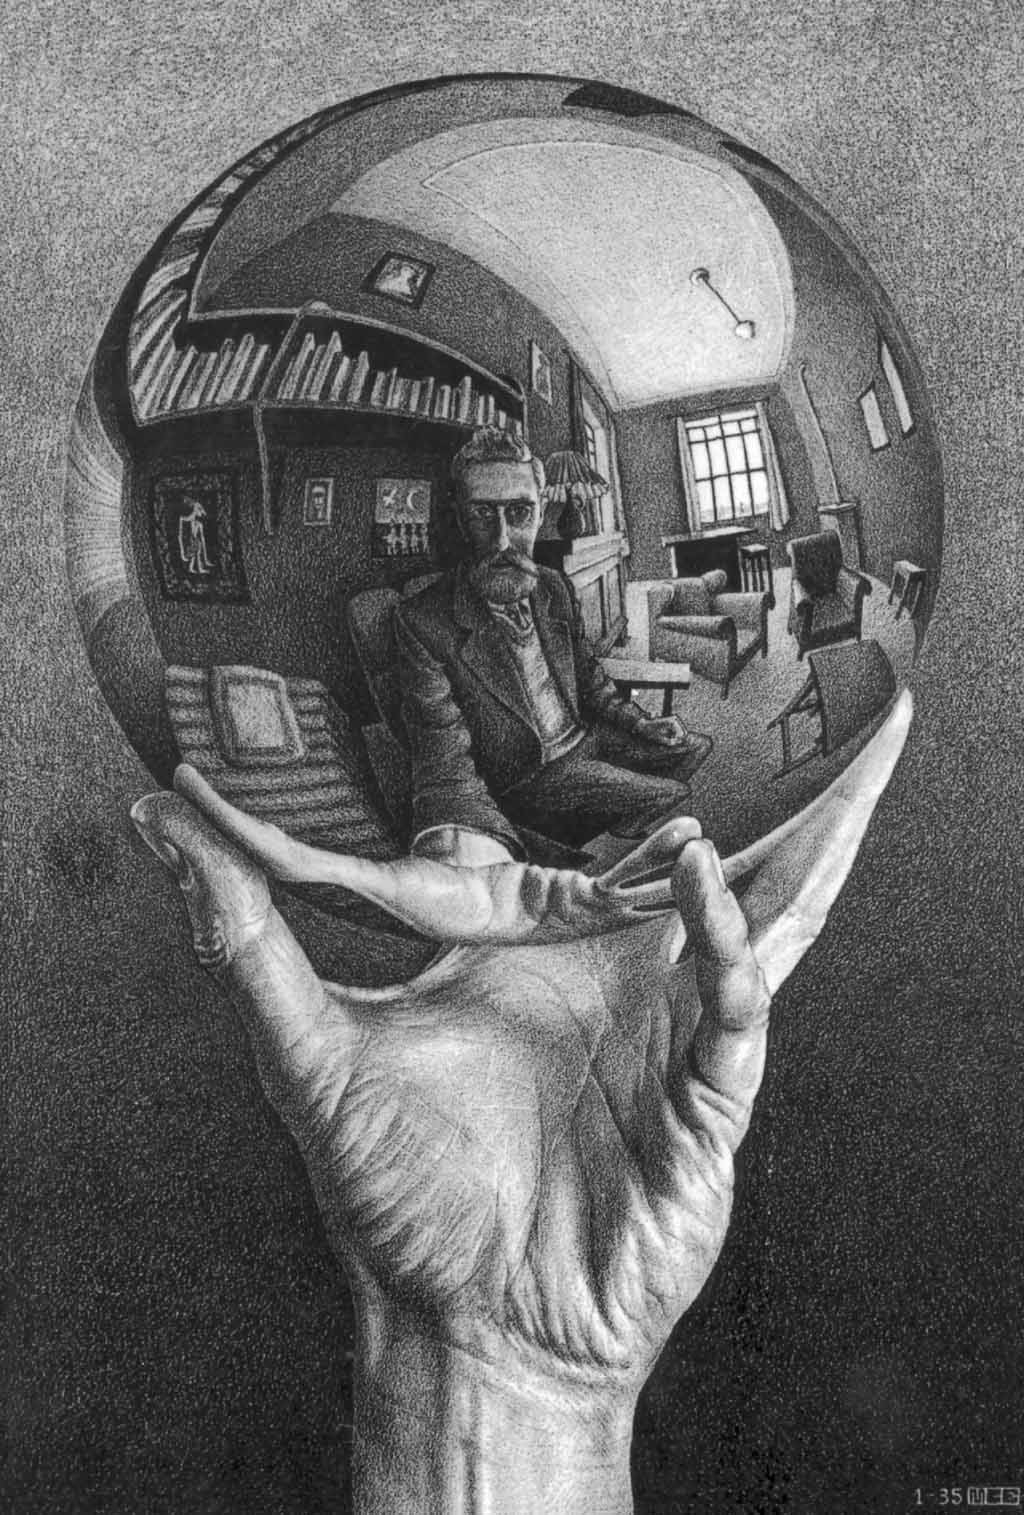 Hand with Reflecting Sphere by M. C. Escher. Lithograph, 1935.